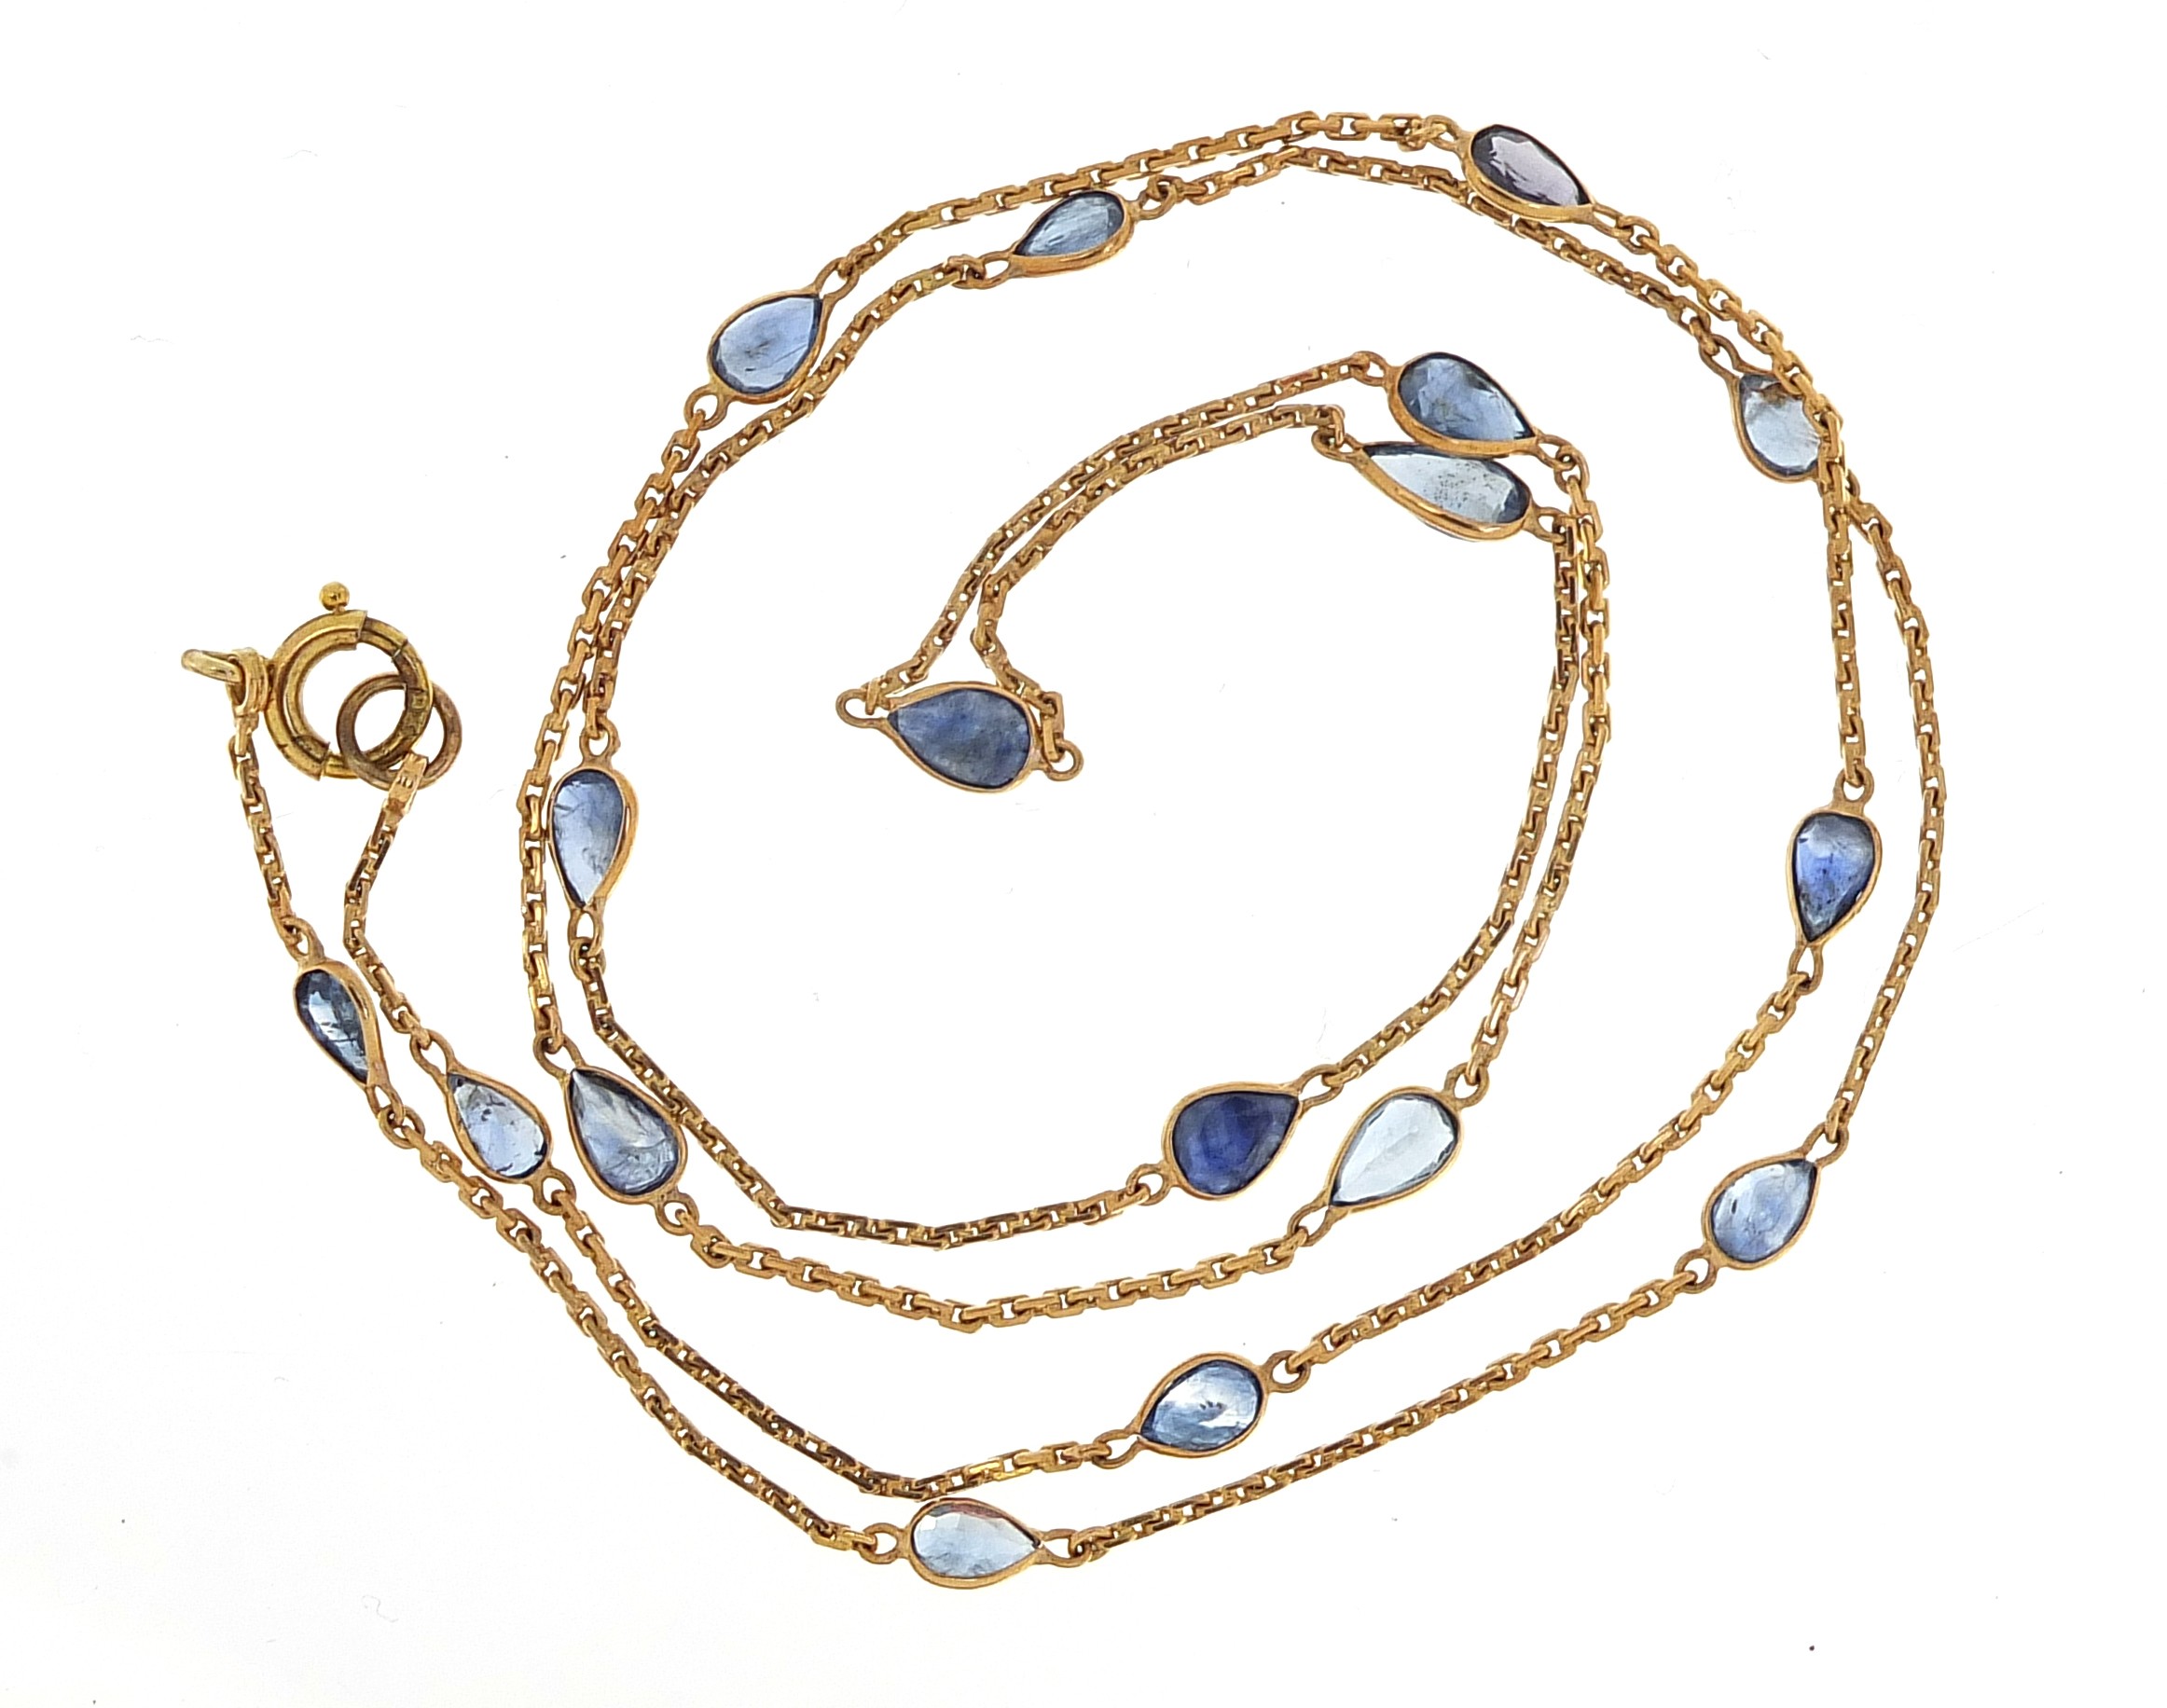 9ct gold teardrop sapphire necklace, 60cm in length, 6.0g - Image 2 of 3